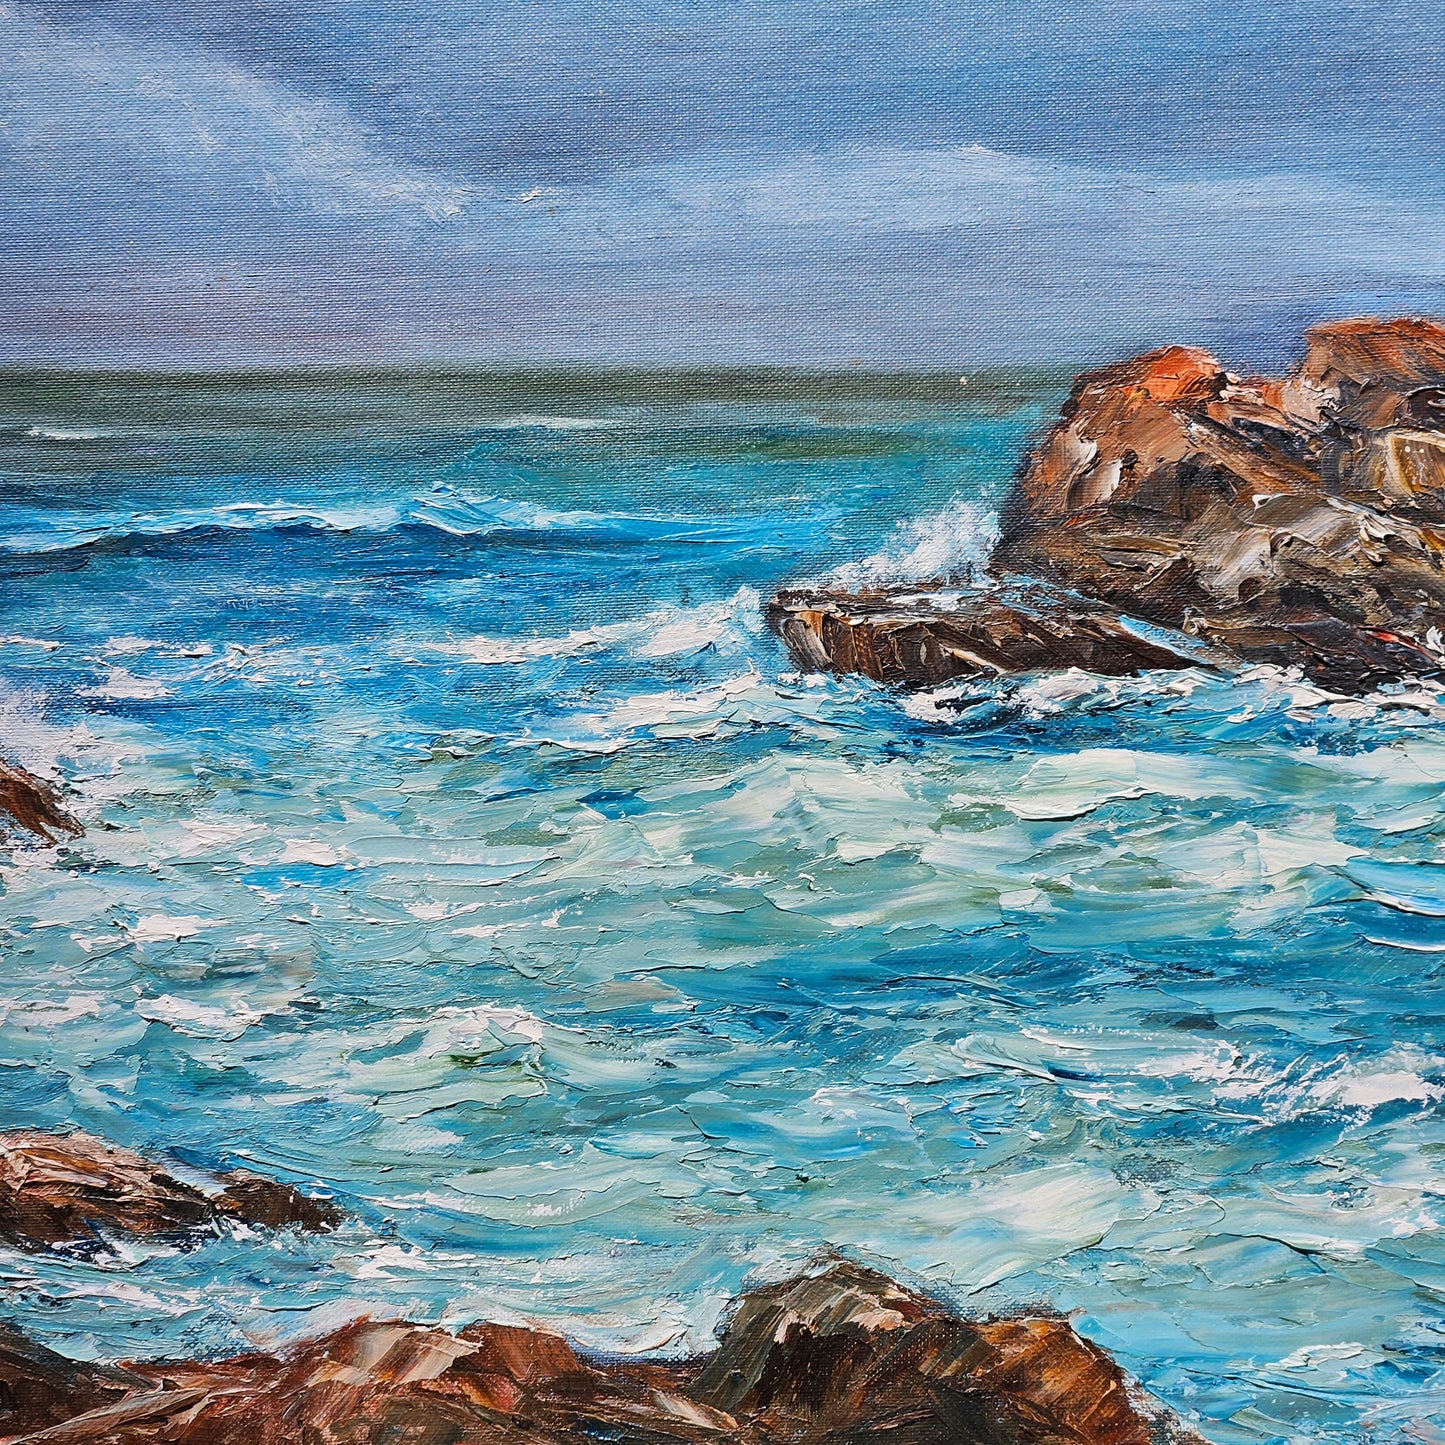 Seascape Painting by Dolores Barnes "Strawberry Granite"